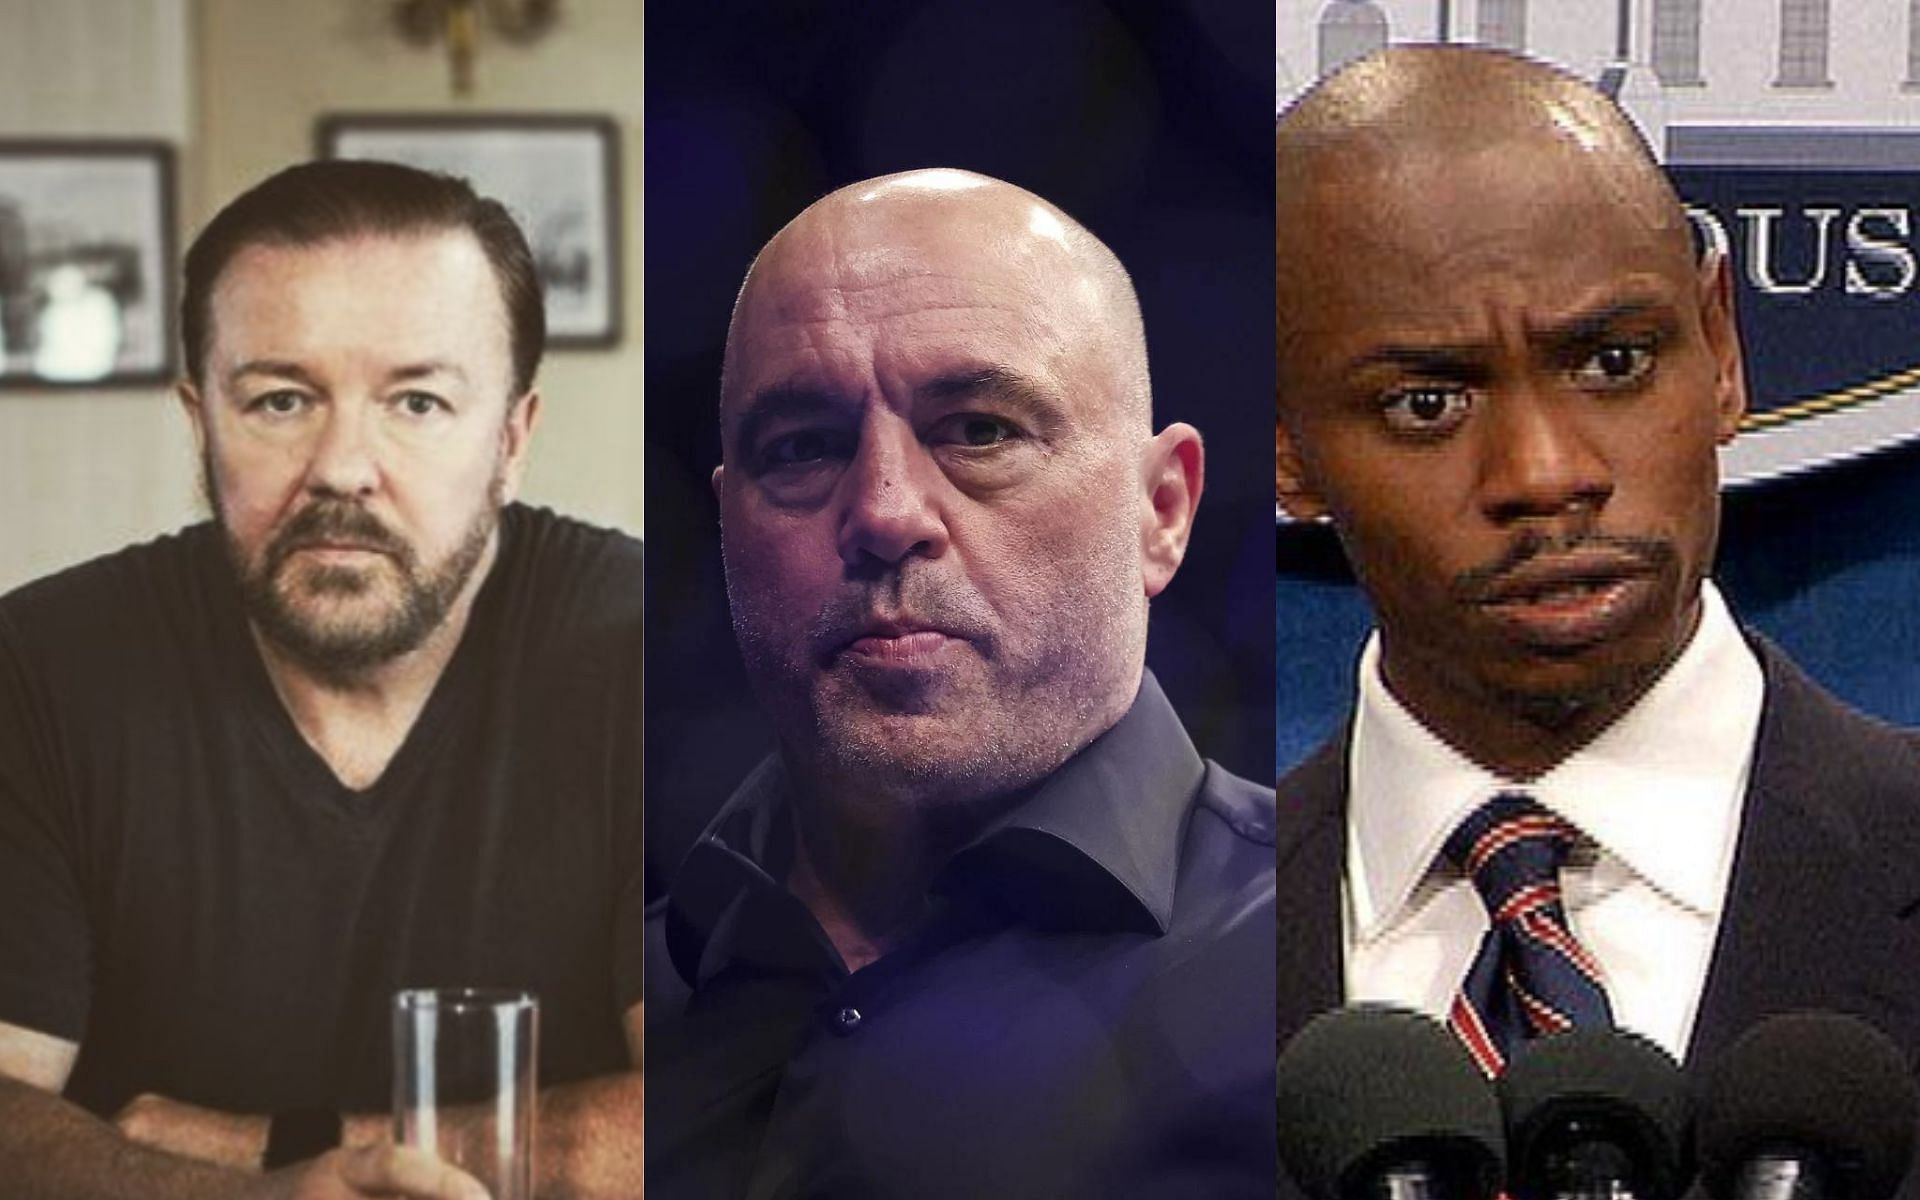 Ricky Gervais (left), Joe Rogan (central), Dave Chappelle (right) [Images courtesy of @davechappelle and @rickygervais on Instagram]